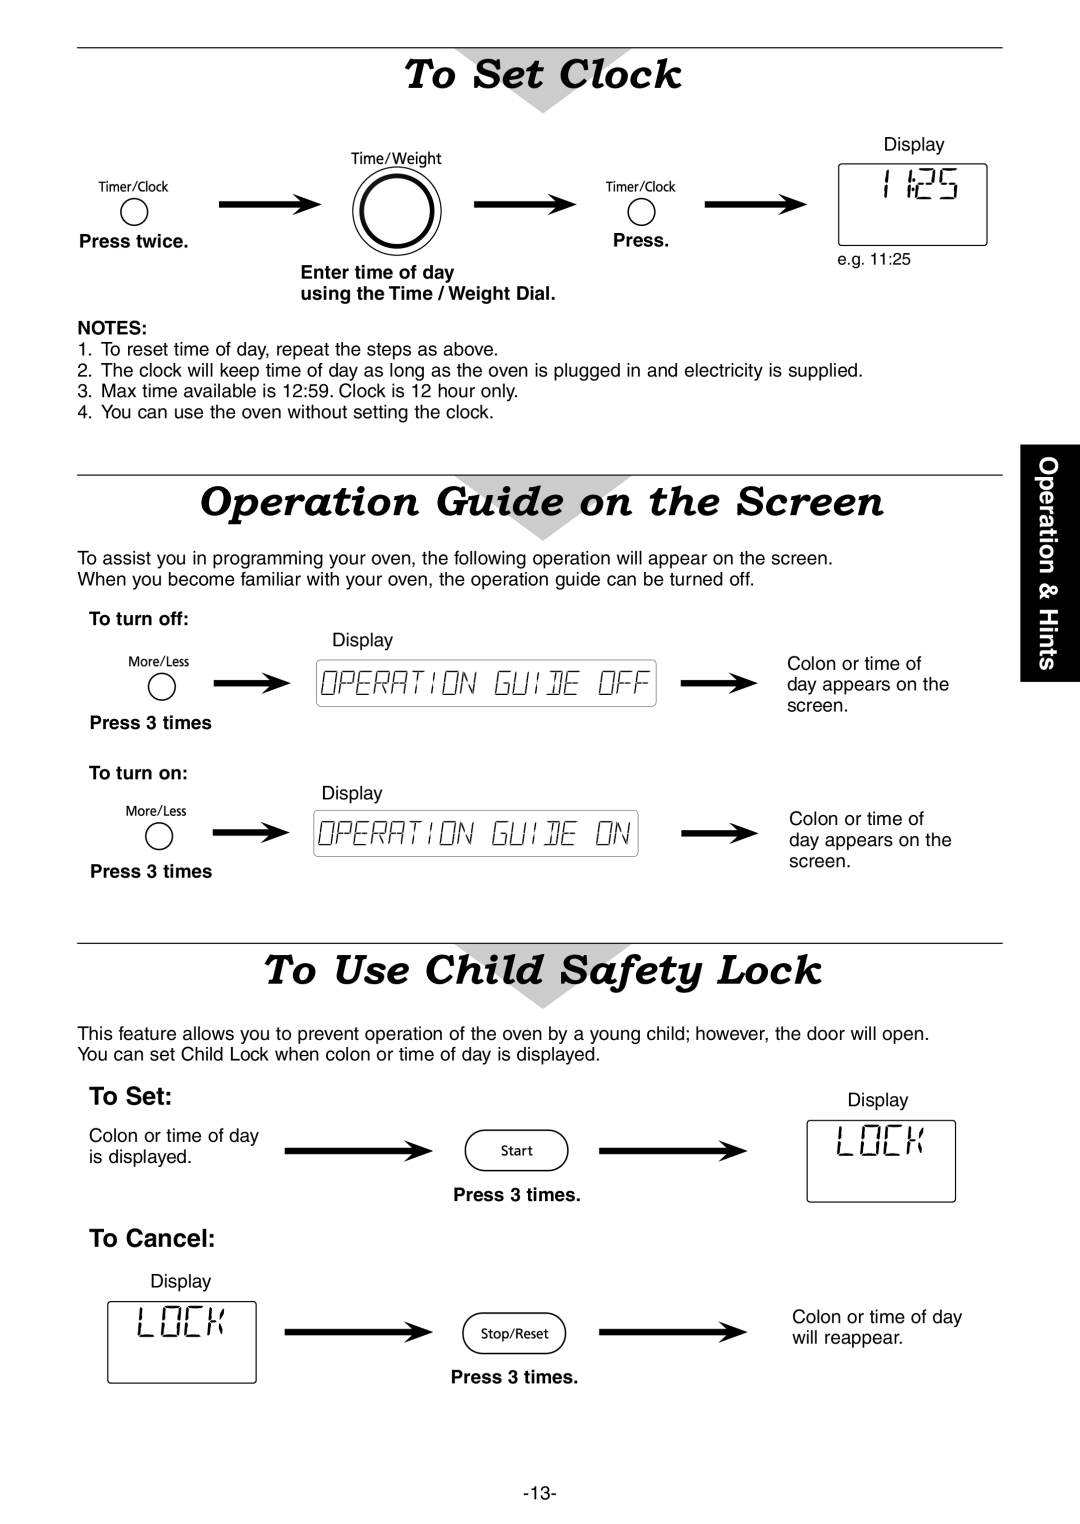 Panasonic NN-CD997S To Set Clock, Operation Guide on the Screen, To Use Child Safety Lock, To Cancel, Operation & Hints 